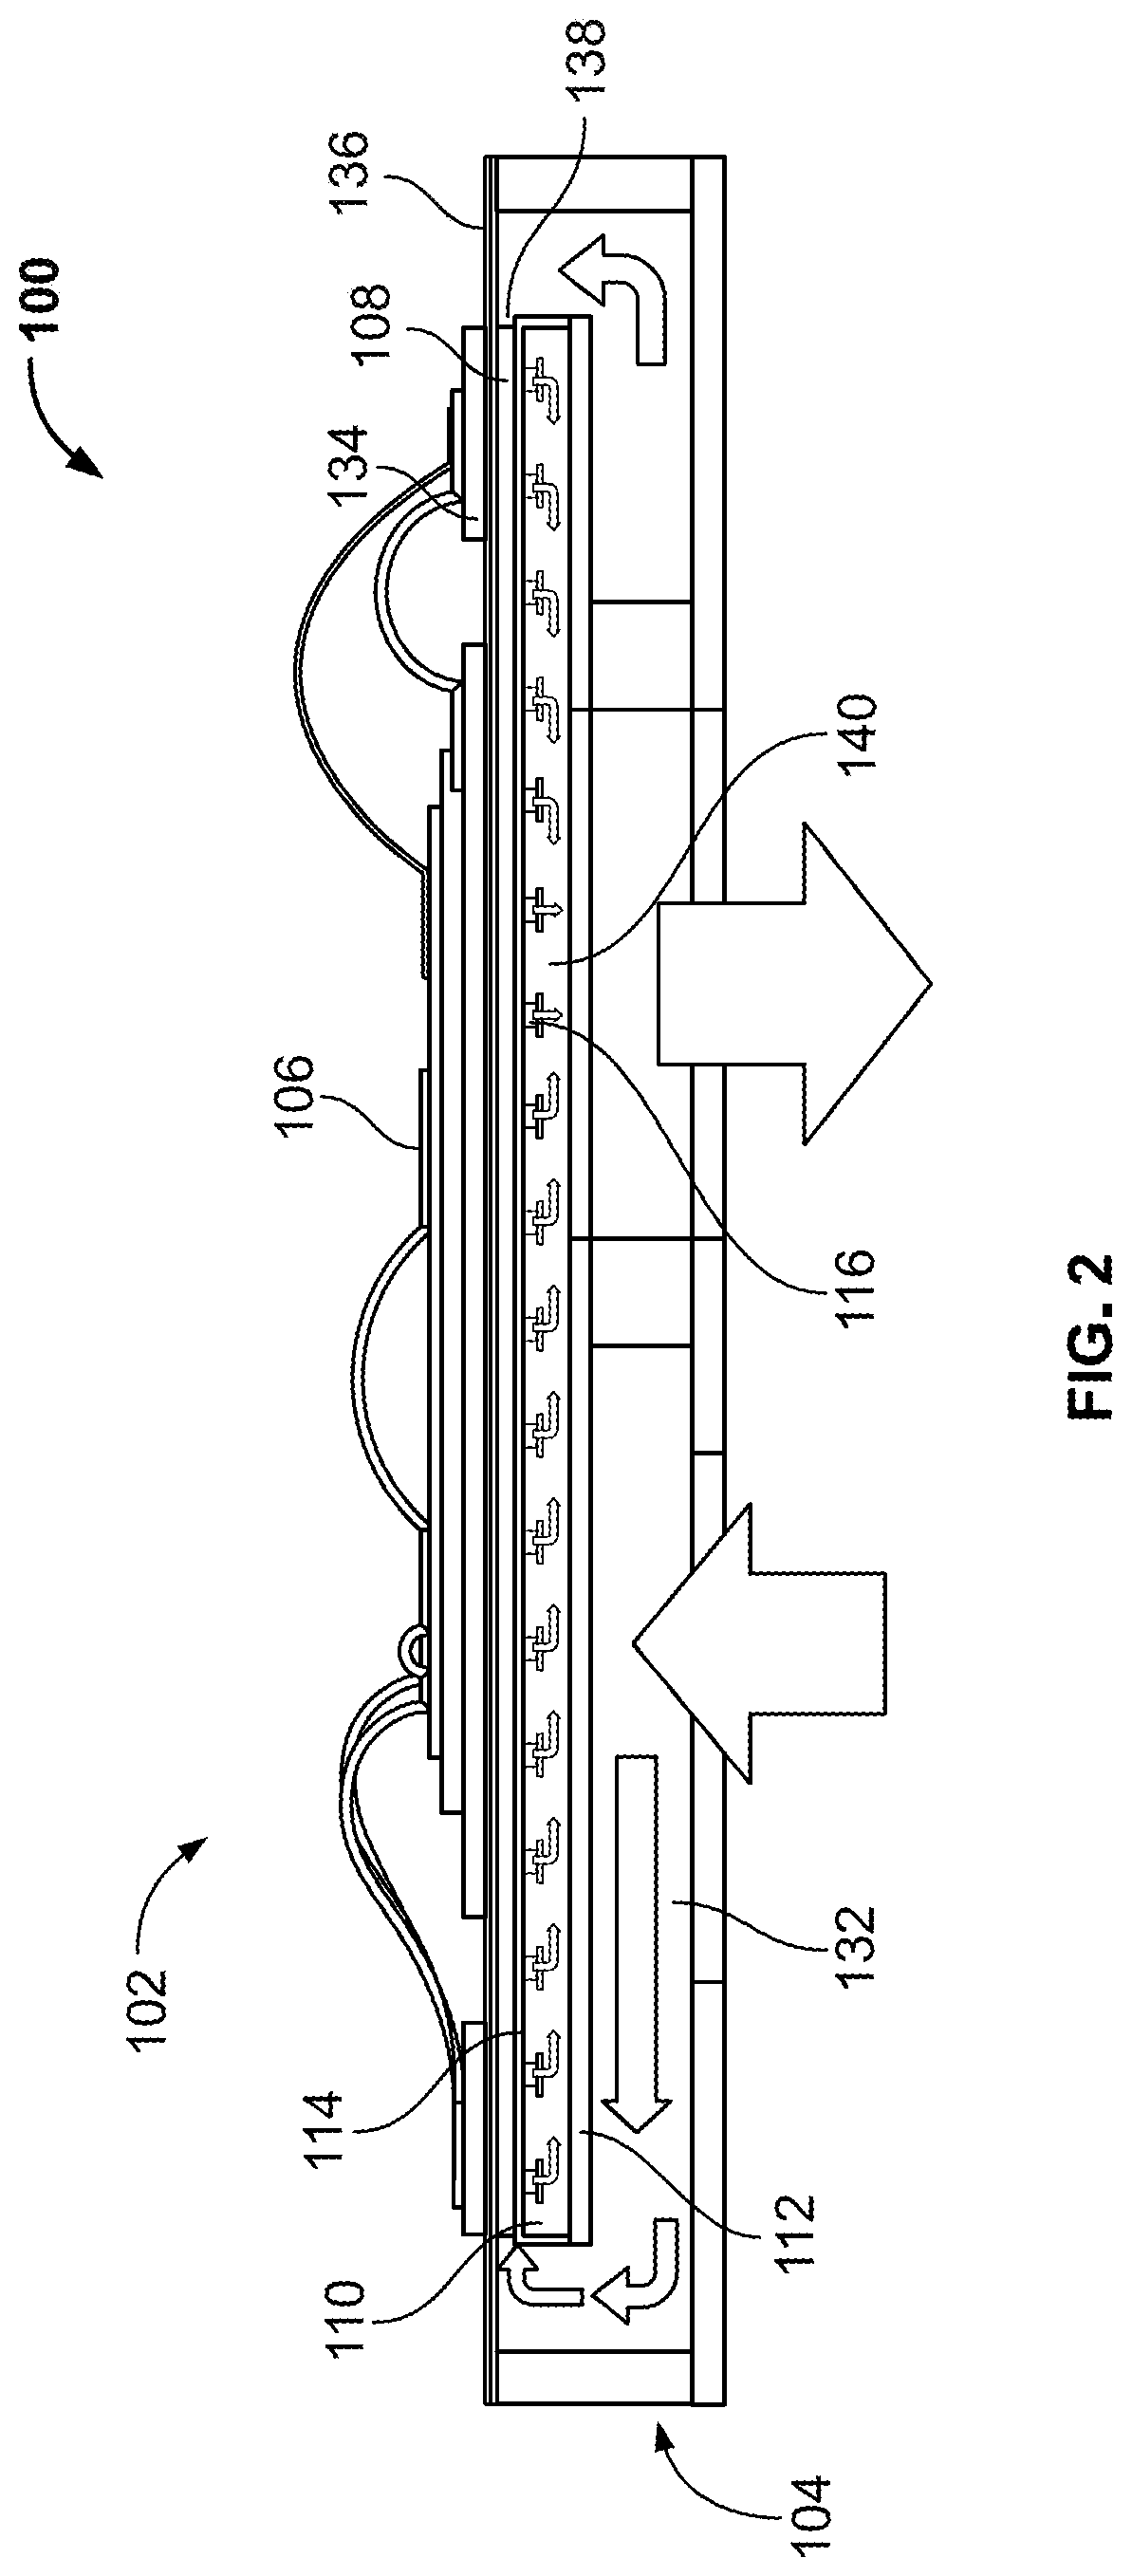 Methods and systems for evaporation of liquid from droplet confined on hollow pillar